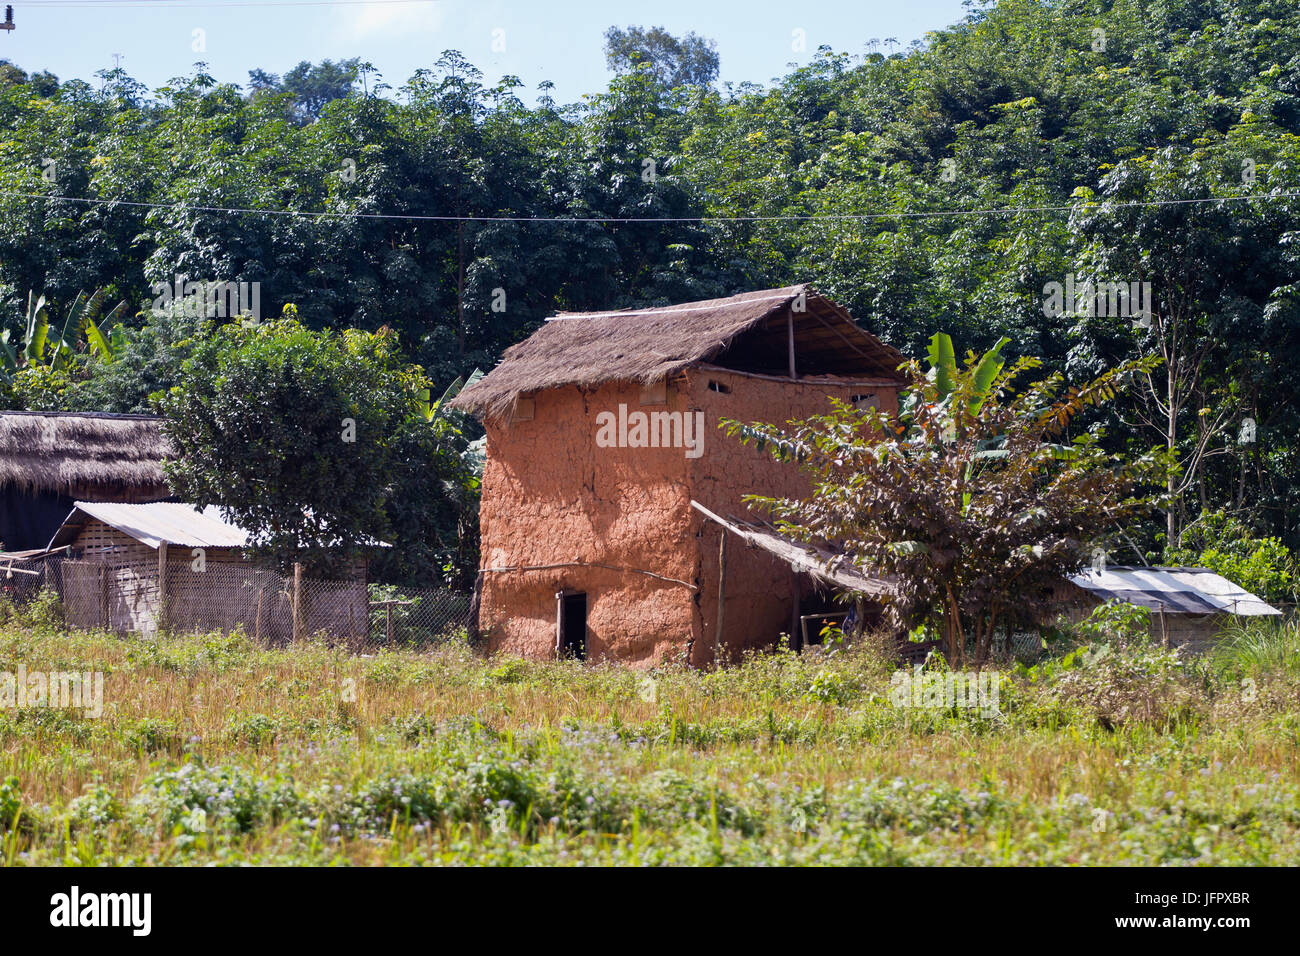 Rice and Tabacco storage n Laos. Stock Photo